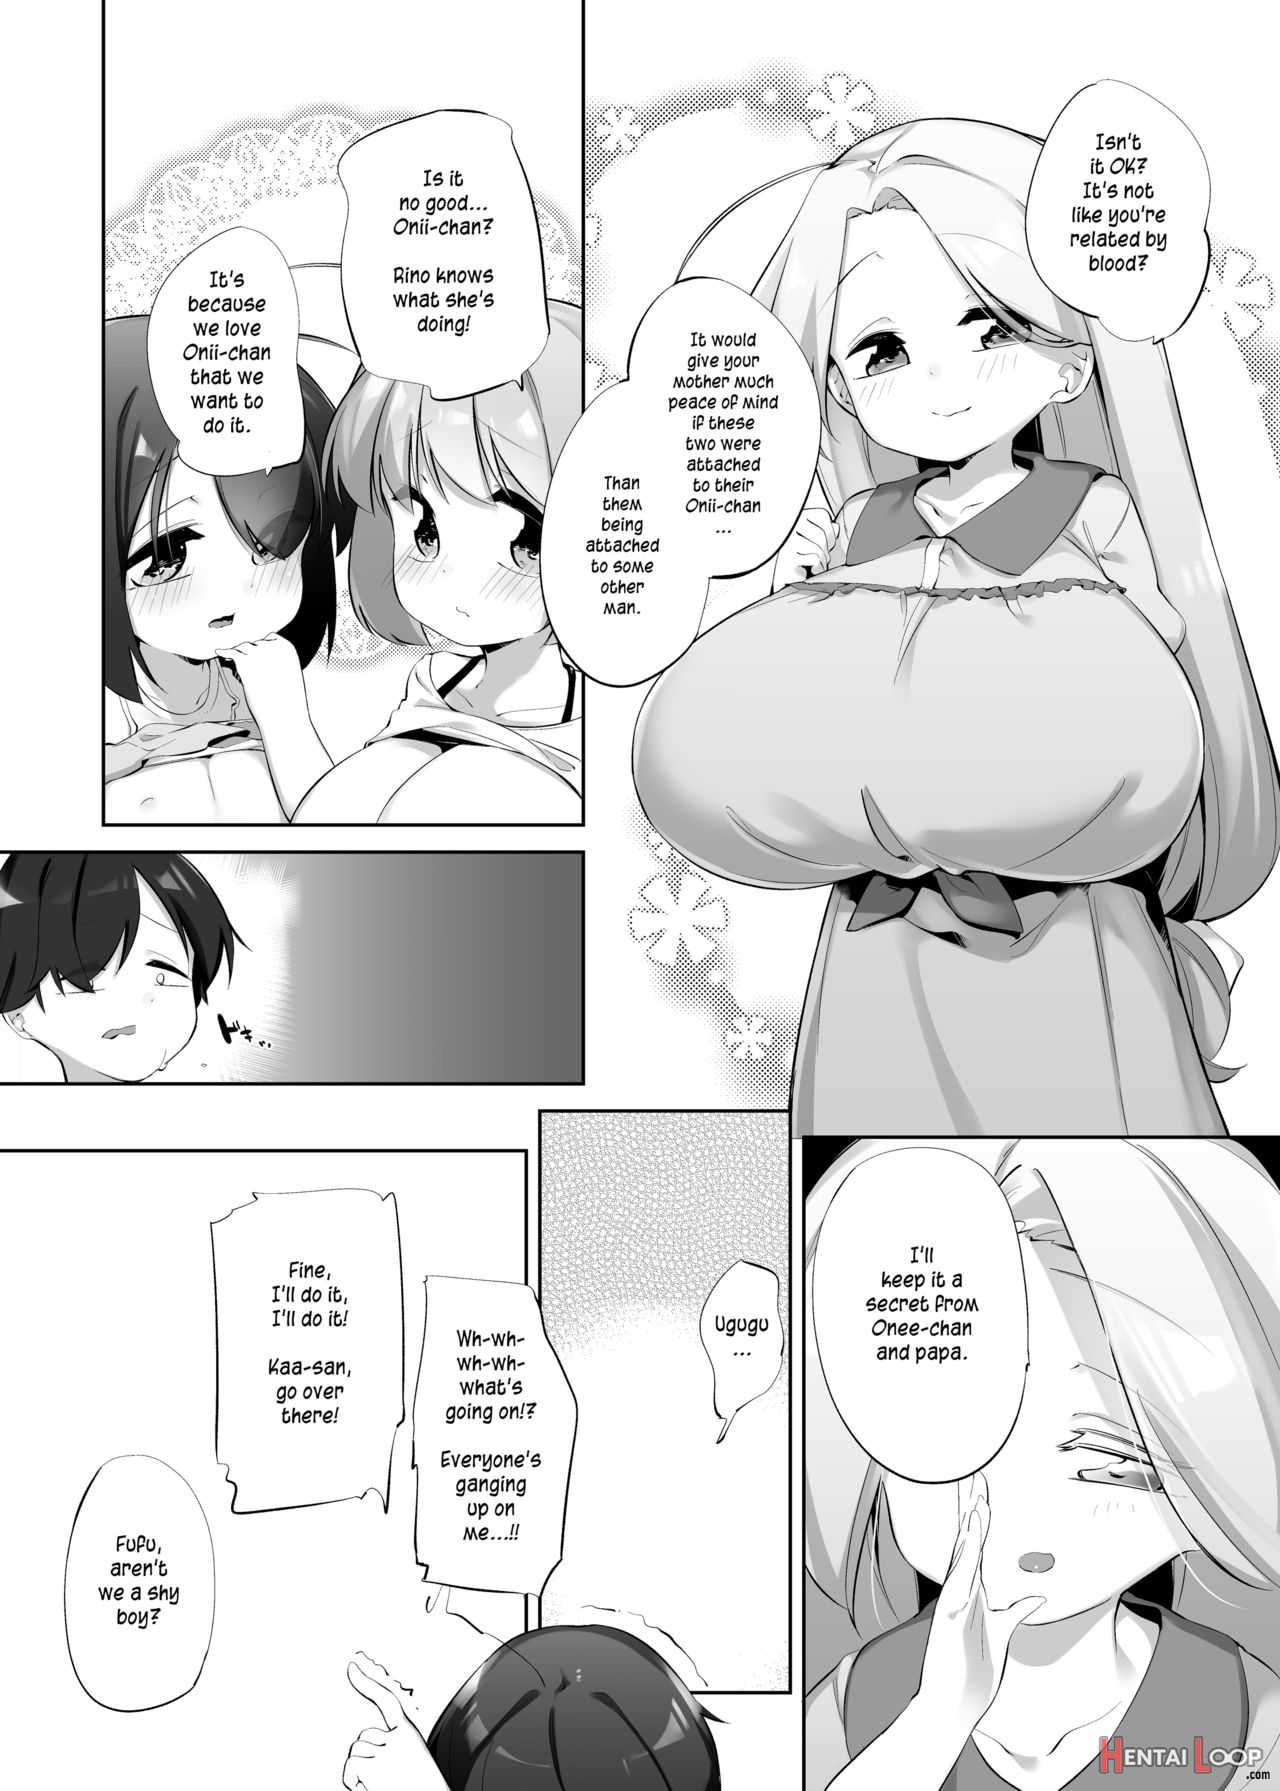 Between Sisters, Are You Happy? page 10